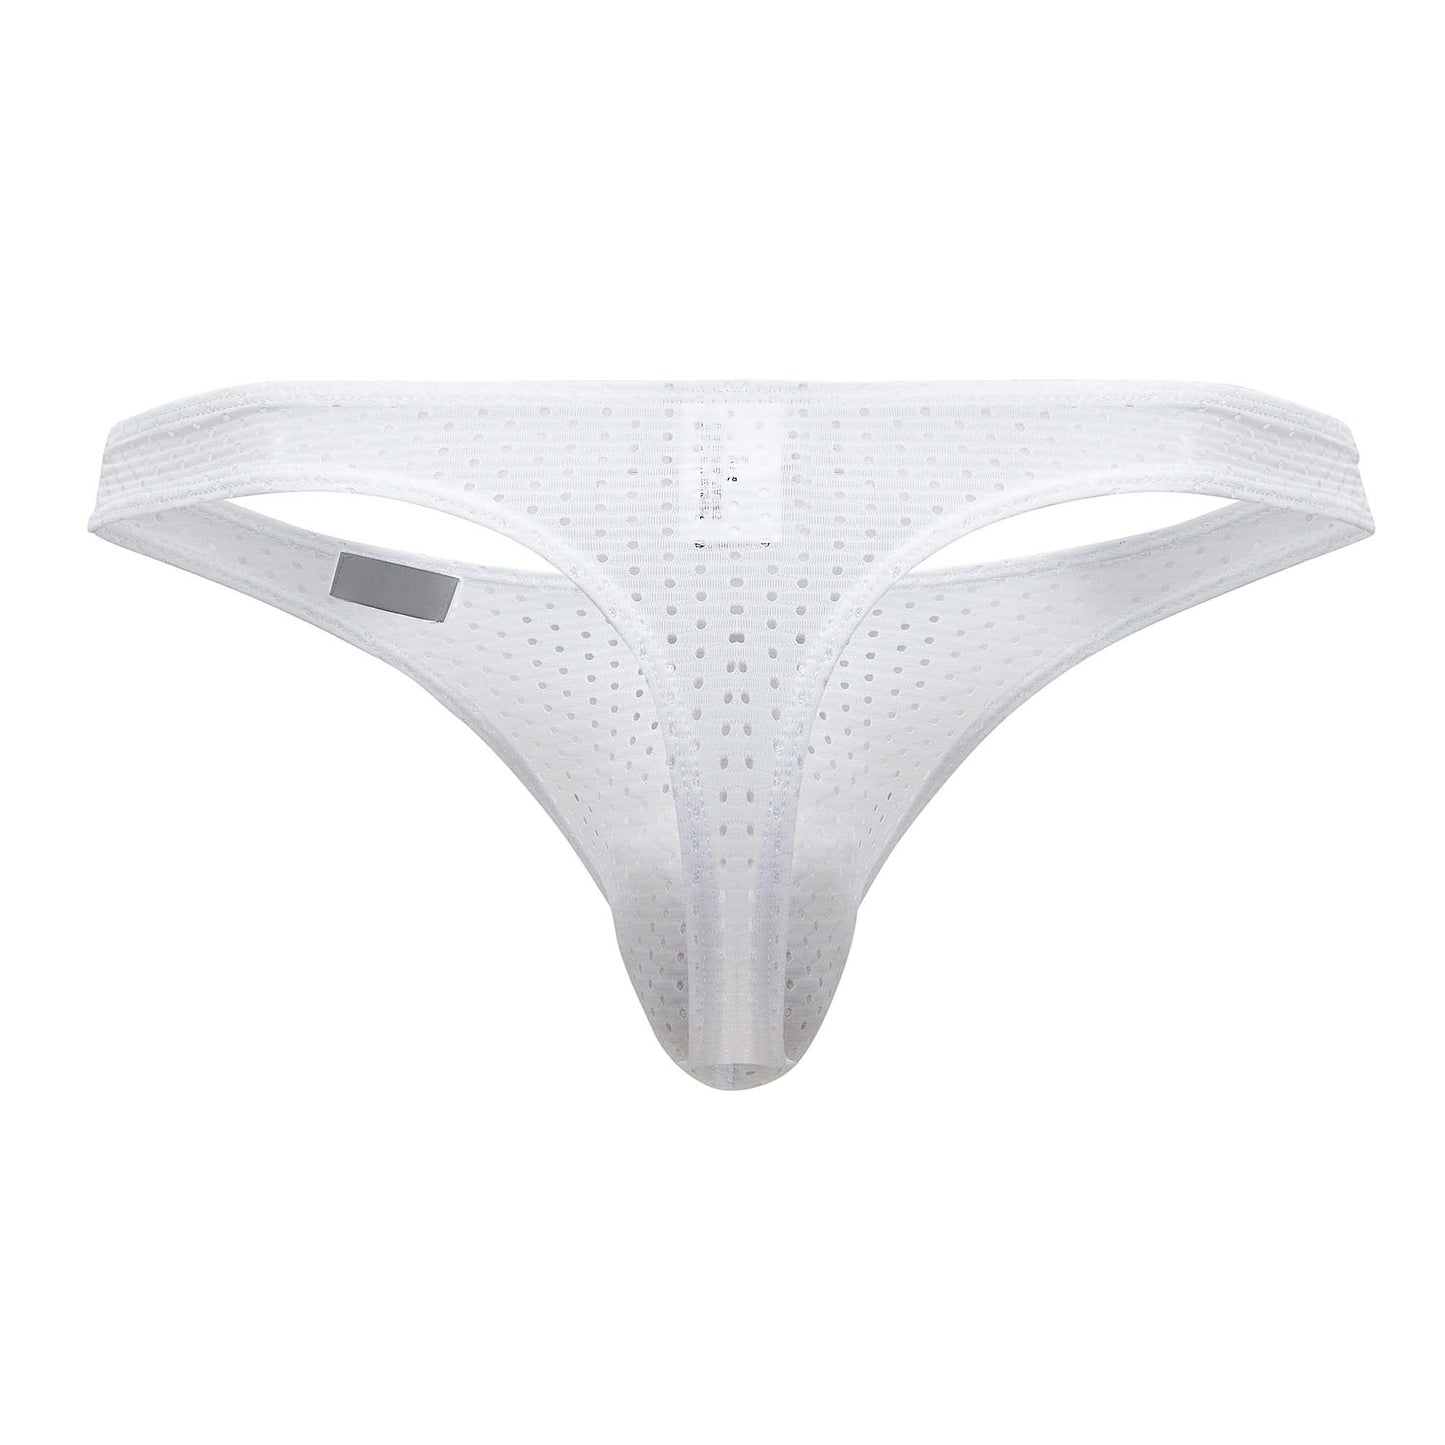 Clever 0929 Fits Thongs